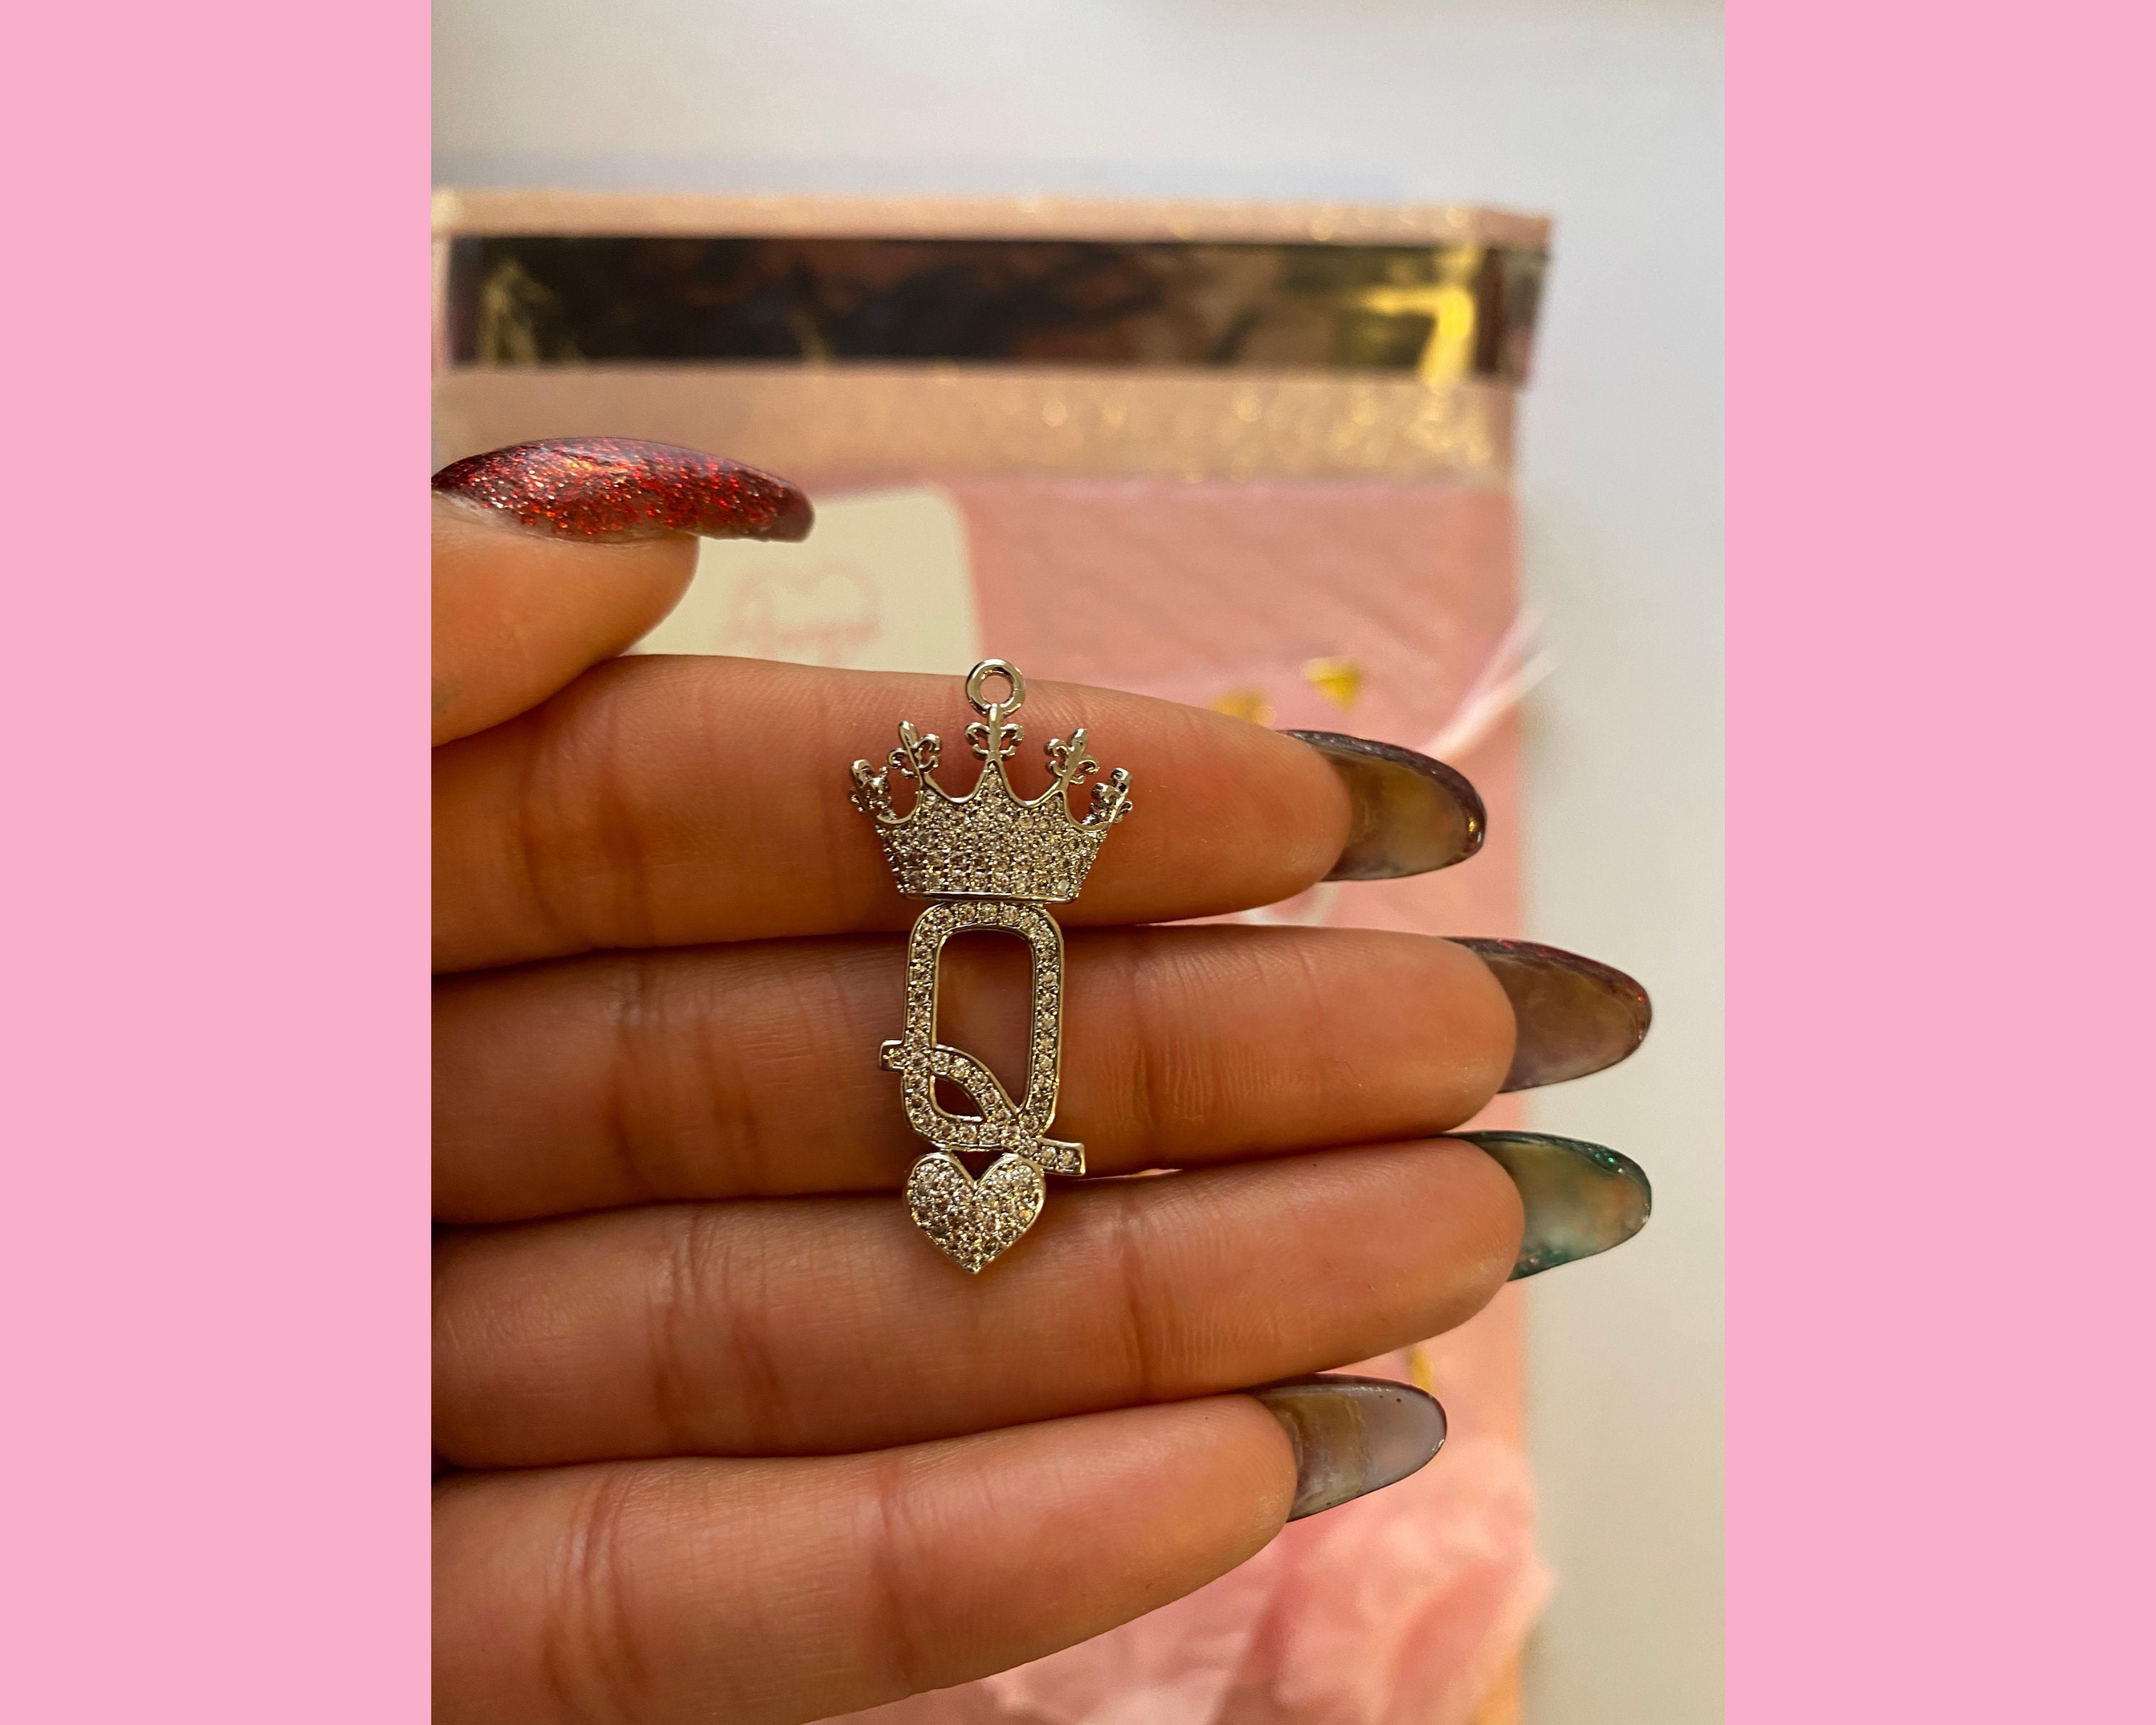 Handcrafted Queen Of Hearts Charm Dead Set With Zirconia Pave Letter Pendant  For Womens Jewelry Making From Huan05, $11.86